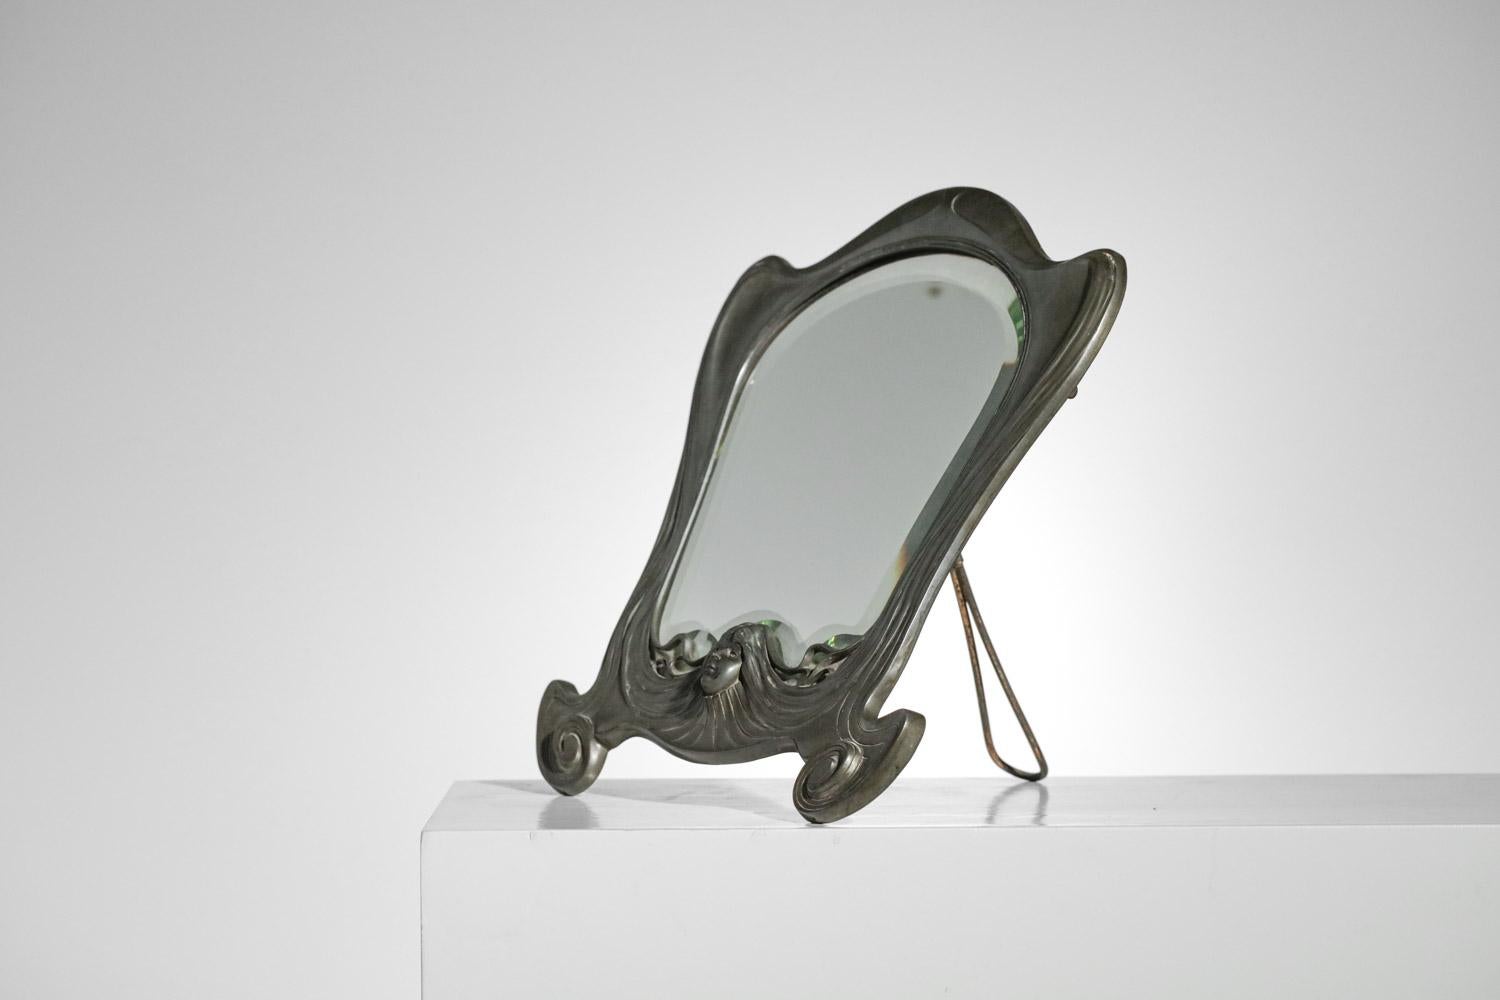 Rare art nouveau mirror from the 20's from the German factory Orivit. Structure of the mirror in solid pewter and mirror. Very nice manufacturing detail on the pewter with the face of a woman in 3D in a typical art nouveau style. Very nice vintage